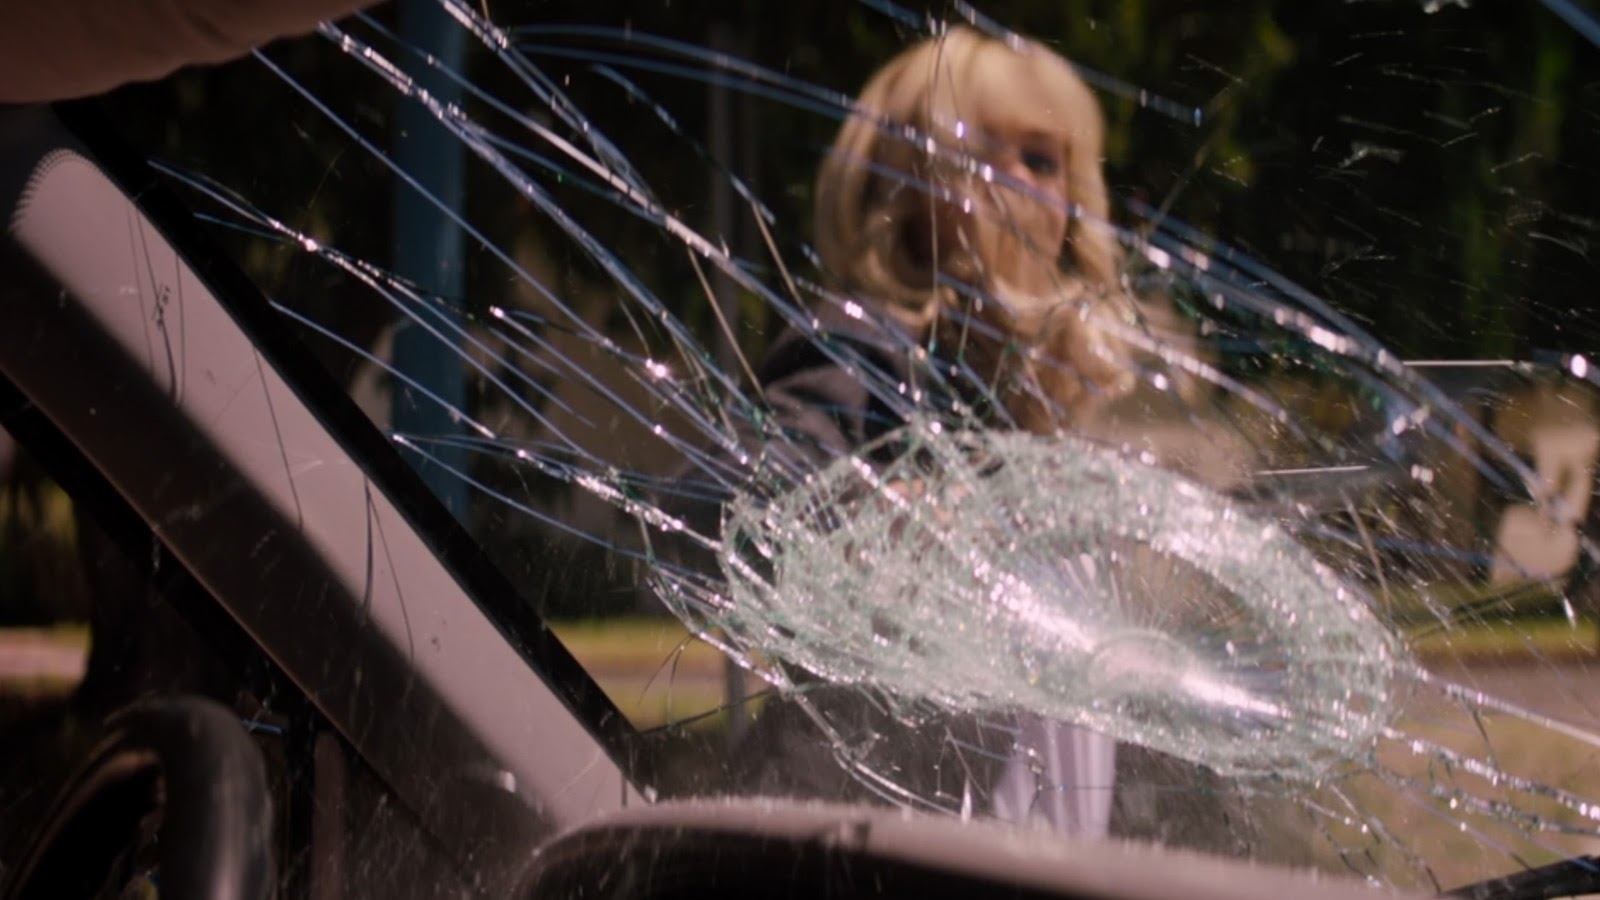 Cassie batters a windshield in Promising Young Woman